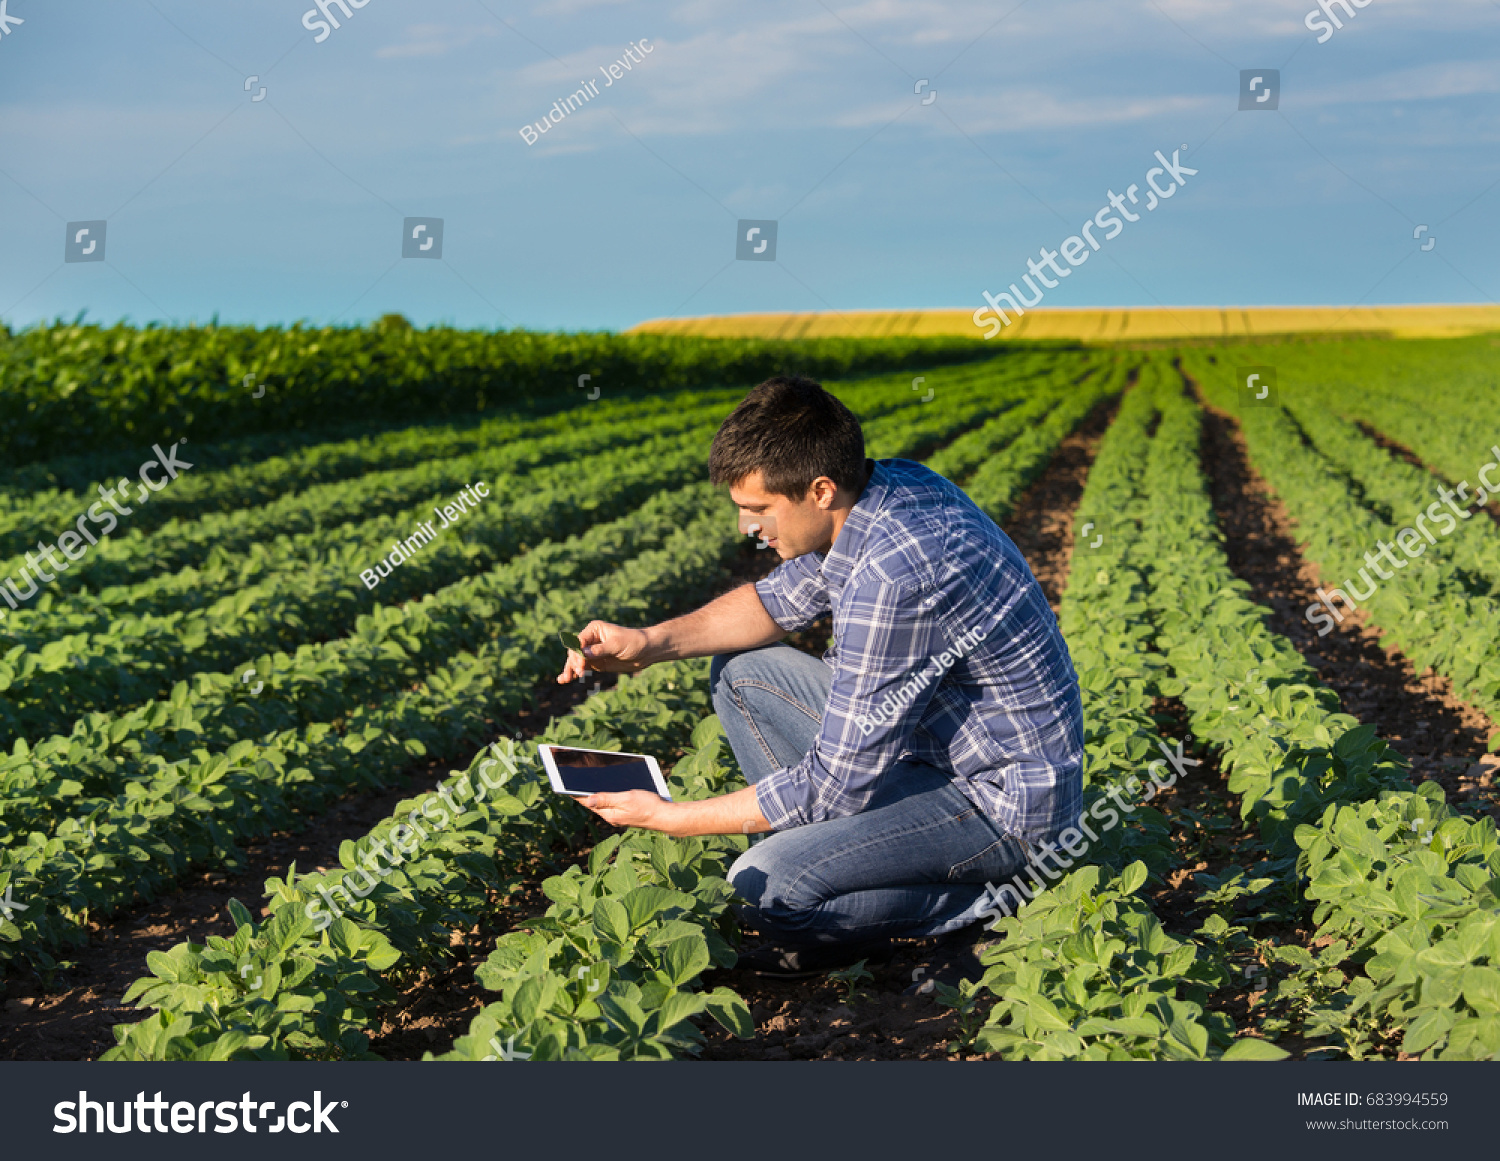 stock-photo-young-handsome-agriculture-engineer-squatting-in-soybean-field-with-tablet-in-hands-in-early-summer-683994559